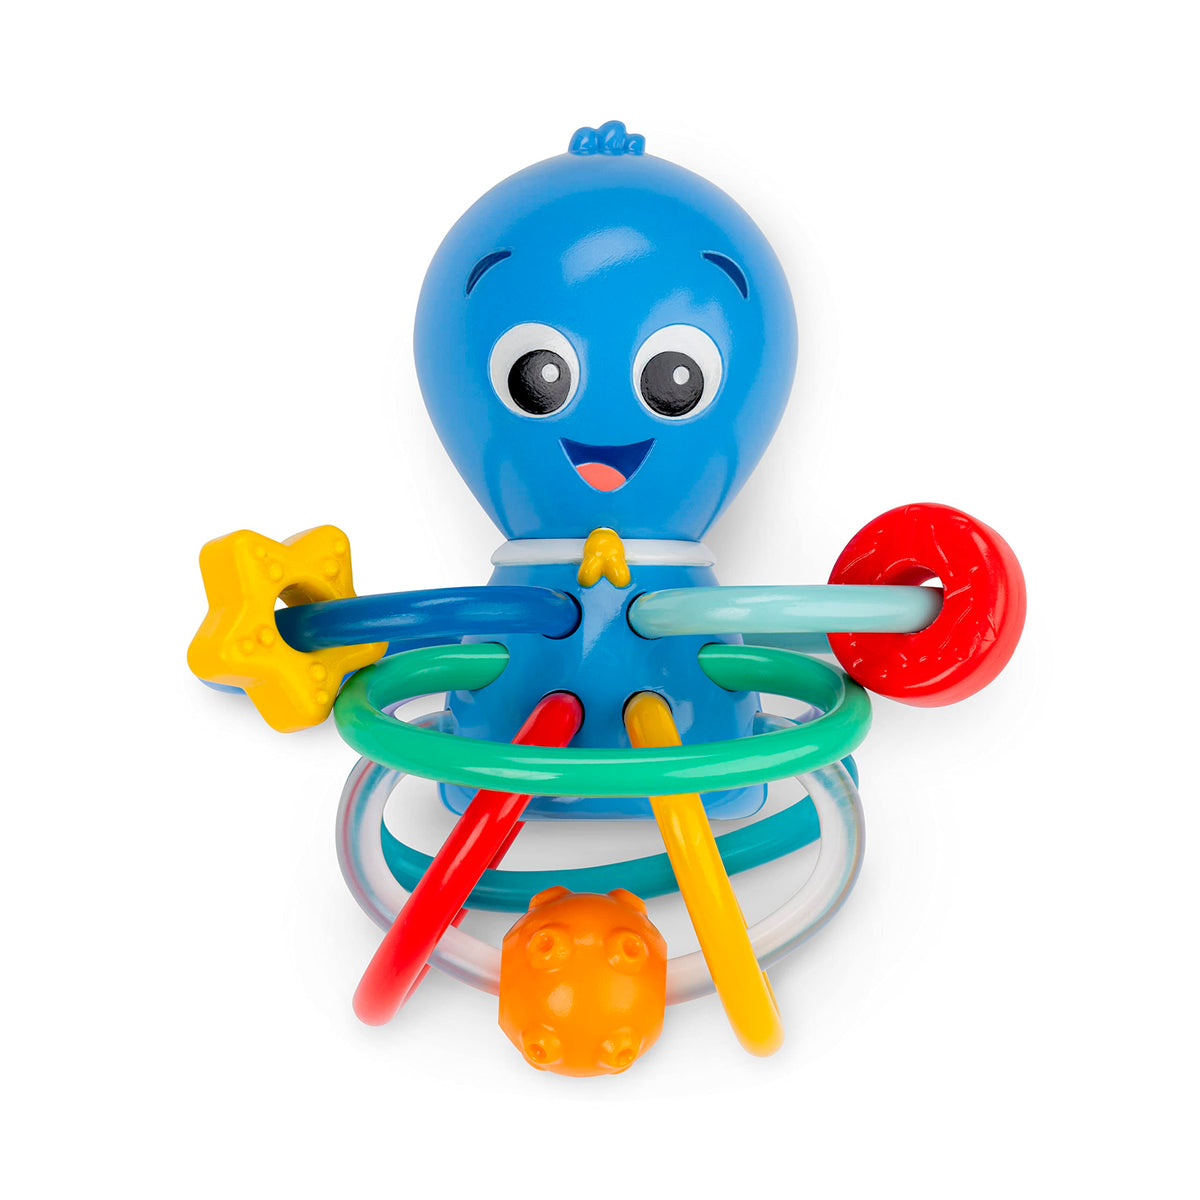 Baby Einstein Ocean Explorers OpusÃƒÆ’Ã‚Â¢ÃƒÂ¢Ã¢â‚¬Å¡Ã‚Â¬ÃƒÂ¢Ã¢â‚¬Å¾Ã‚Â¢s Shake & Soothe Teether Toy & Rattle, Ages 0 Months and Up